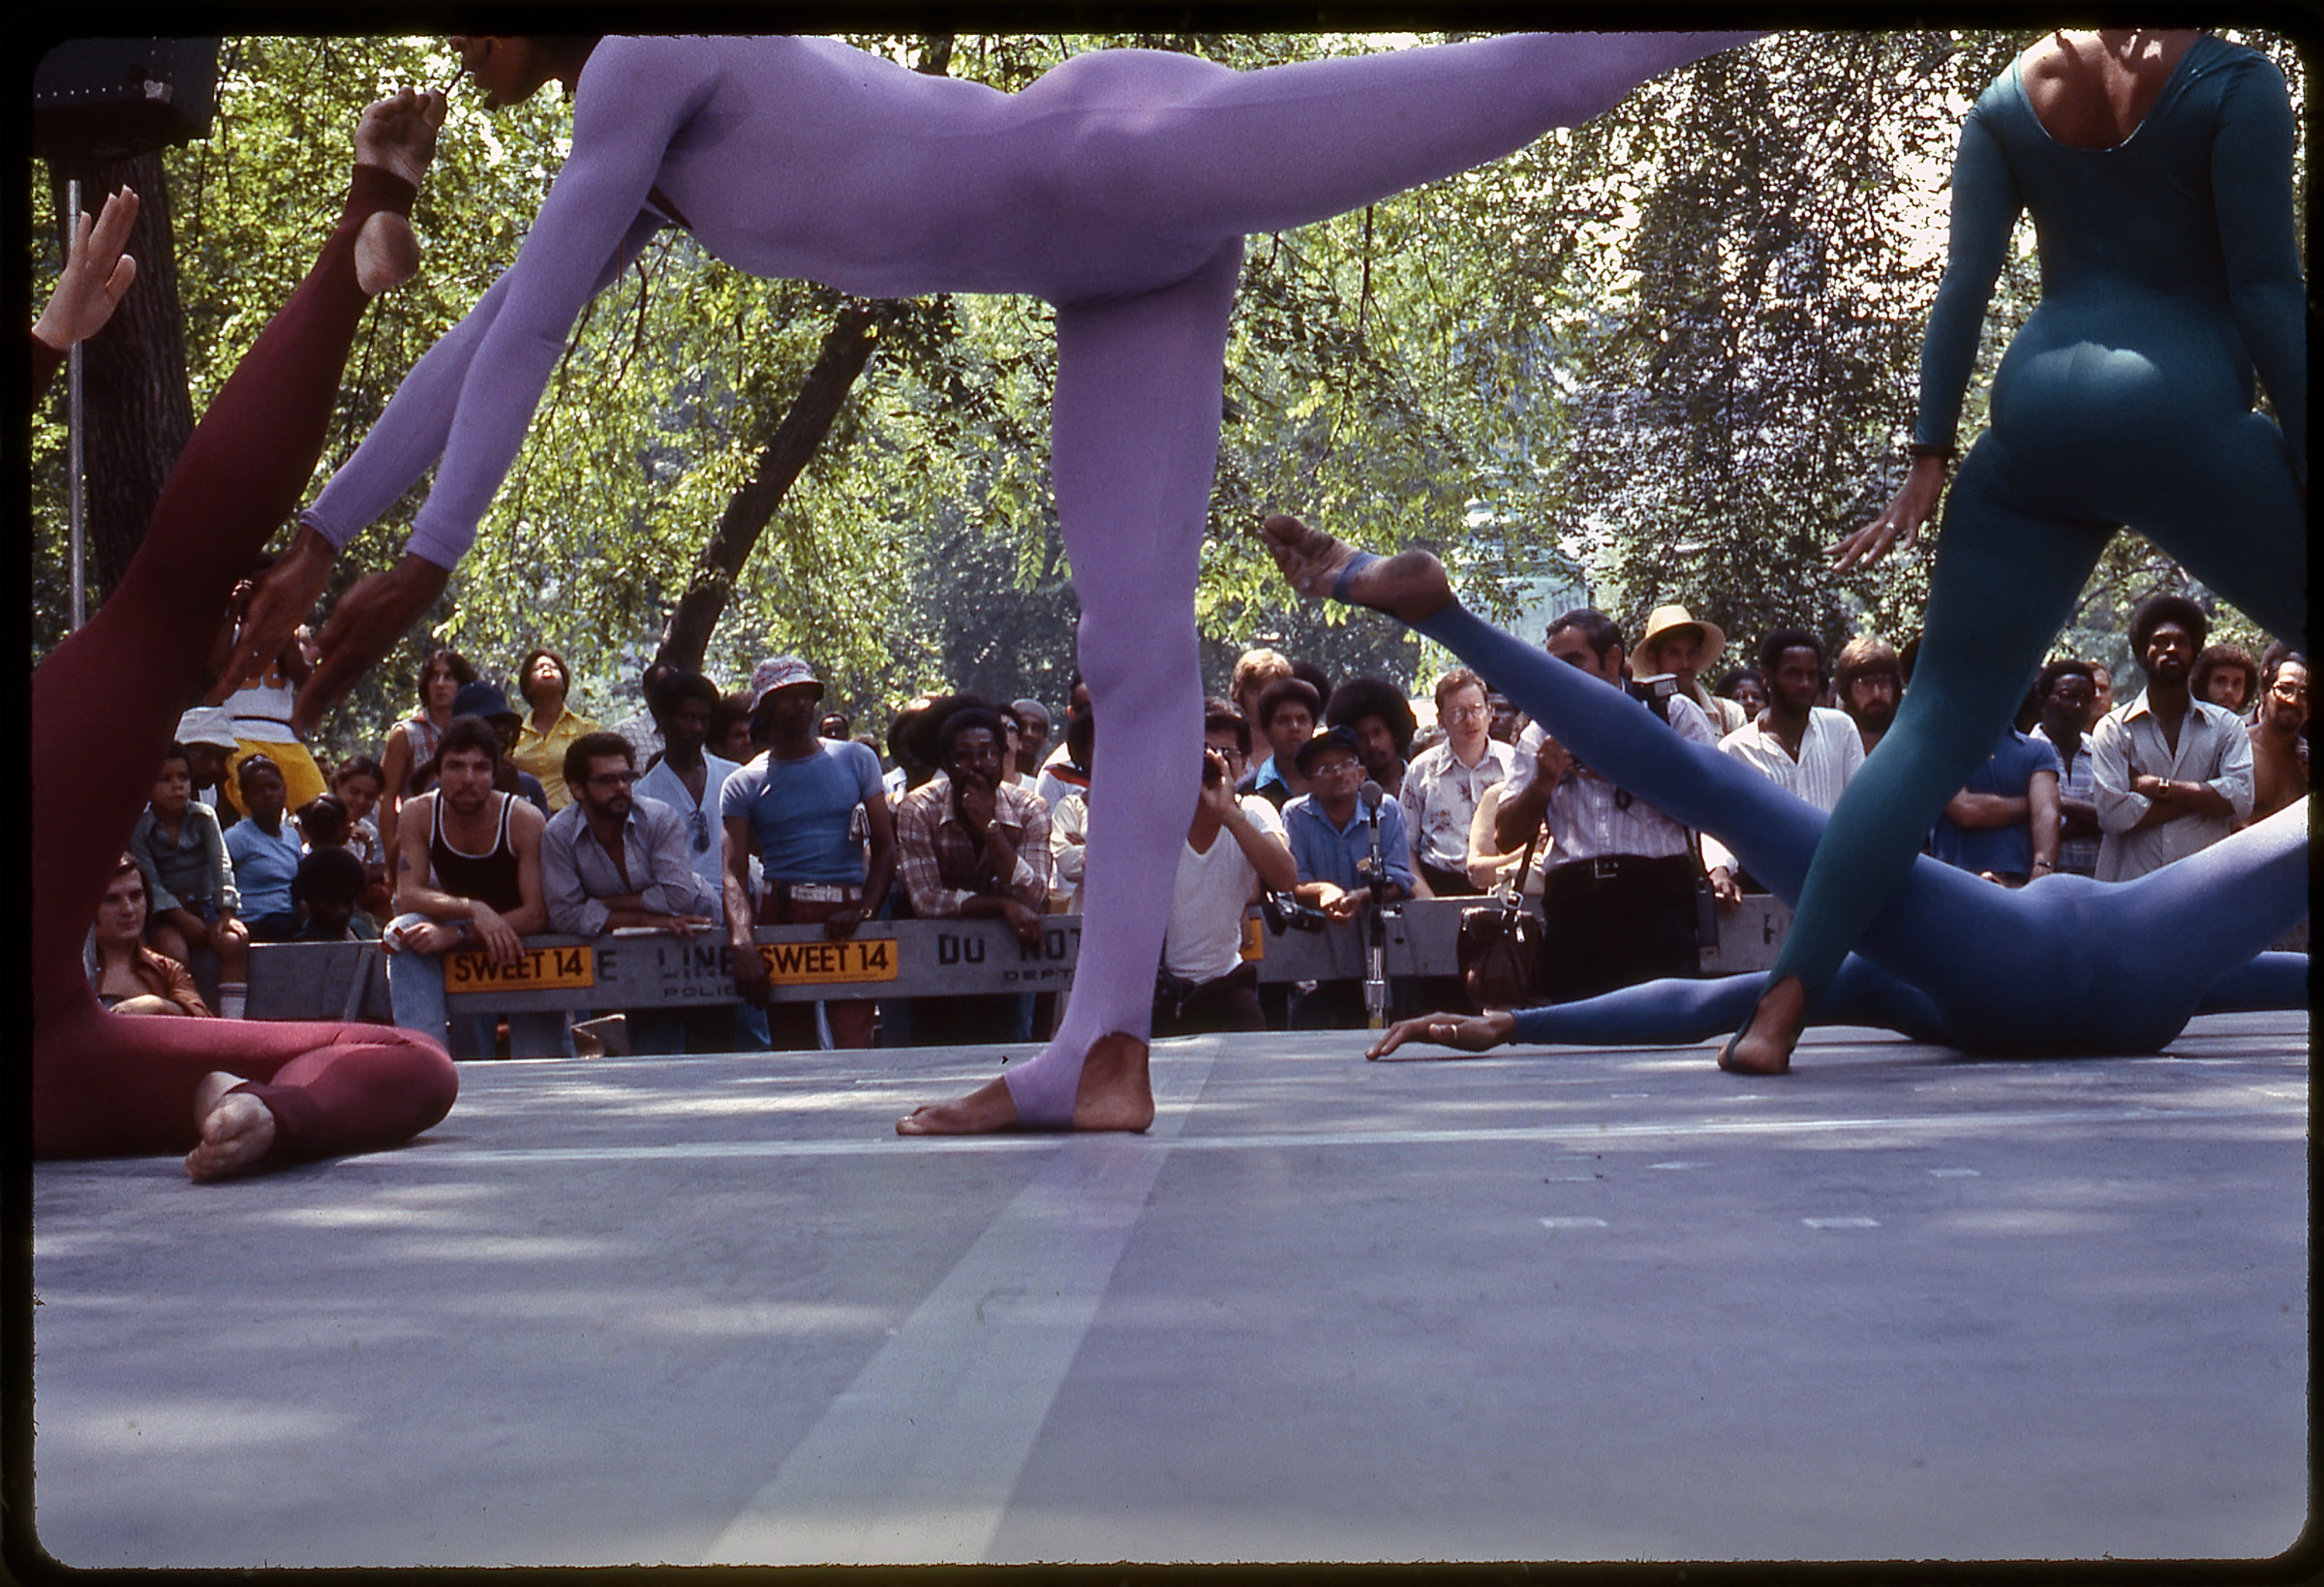 Street level view of dancers performing in a park, with a crowd of people viewing the performance in the background underneath a canopy of trees. At center is a dancer wearing a lavender bodysuit, standing on one leg with their other leg raised behind them and their arms pointed down to the ground. Other dancers, in burgundy, blue, and teal bodysuits, are in various dynamic positions surrounding the central figure. 